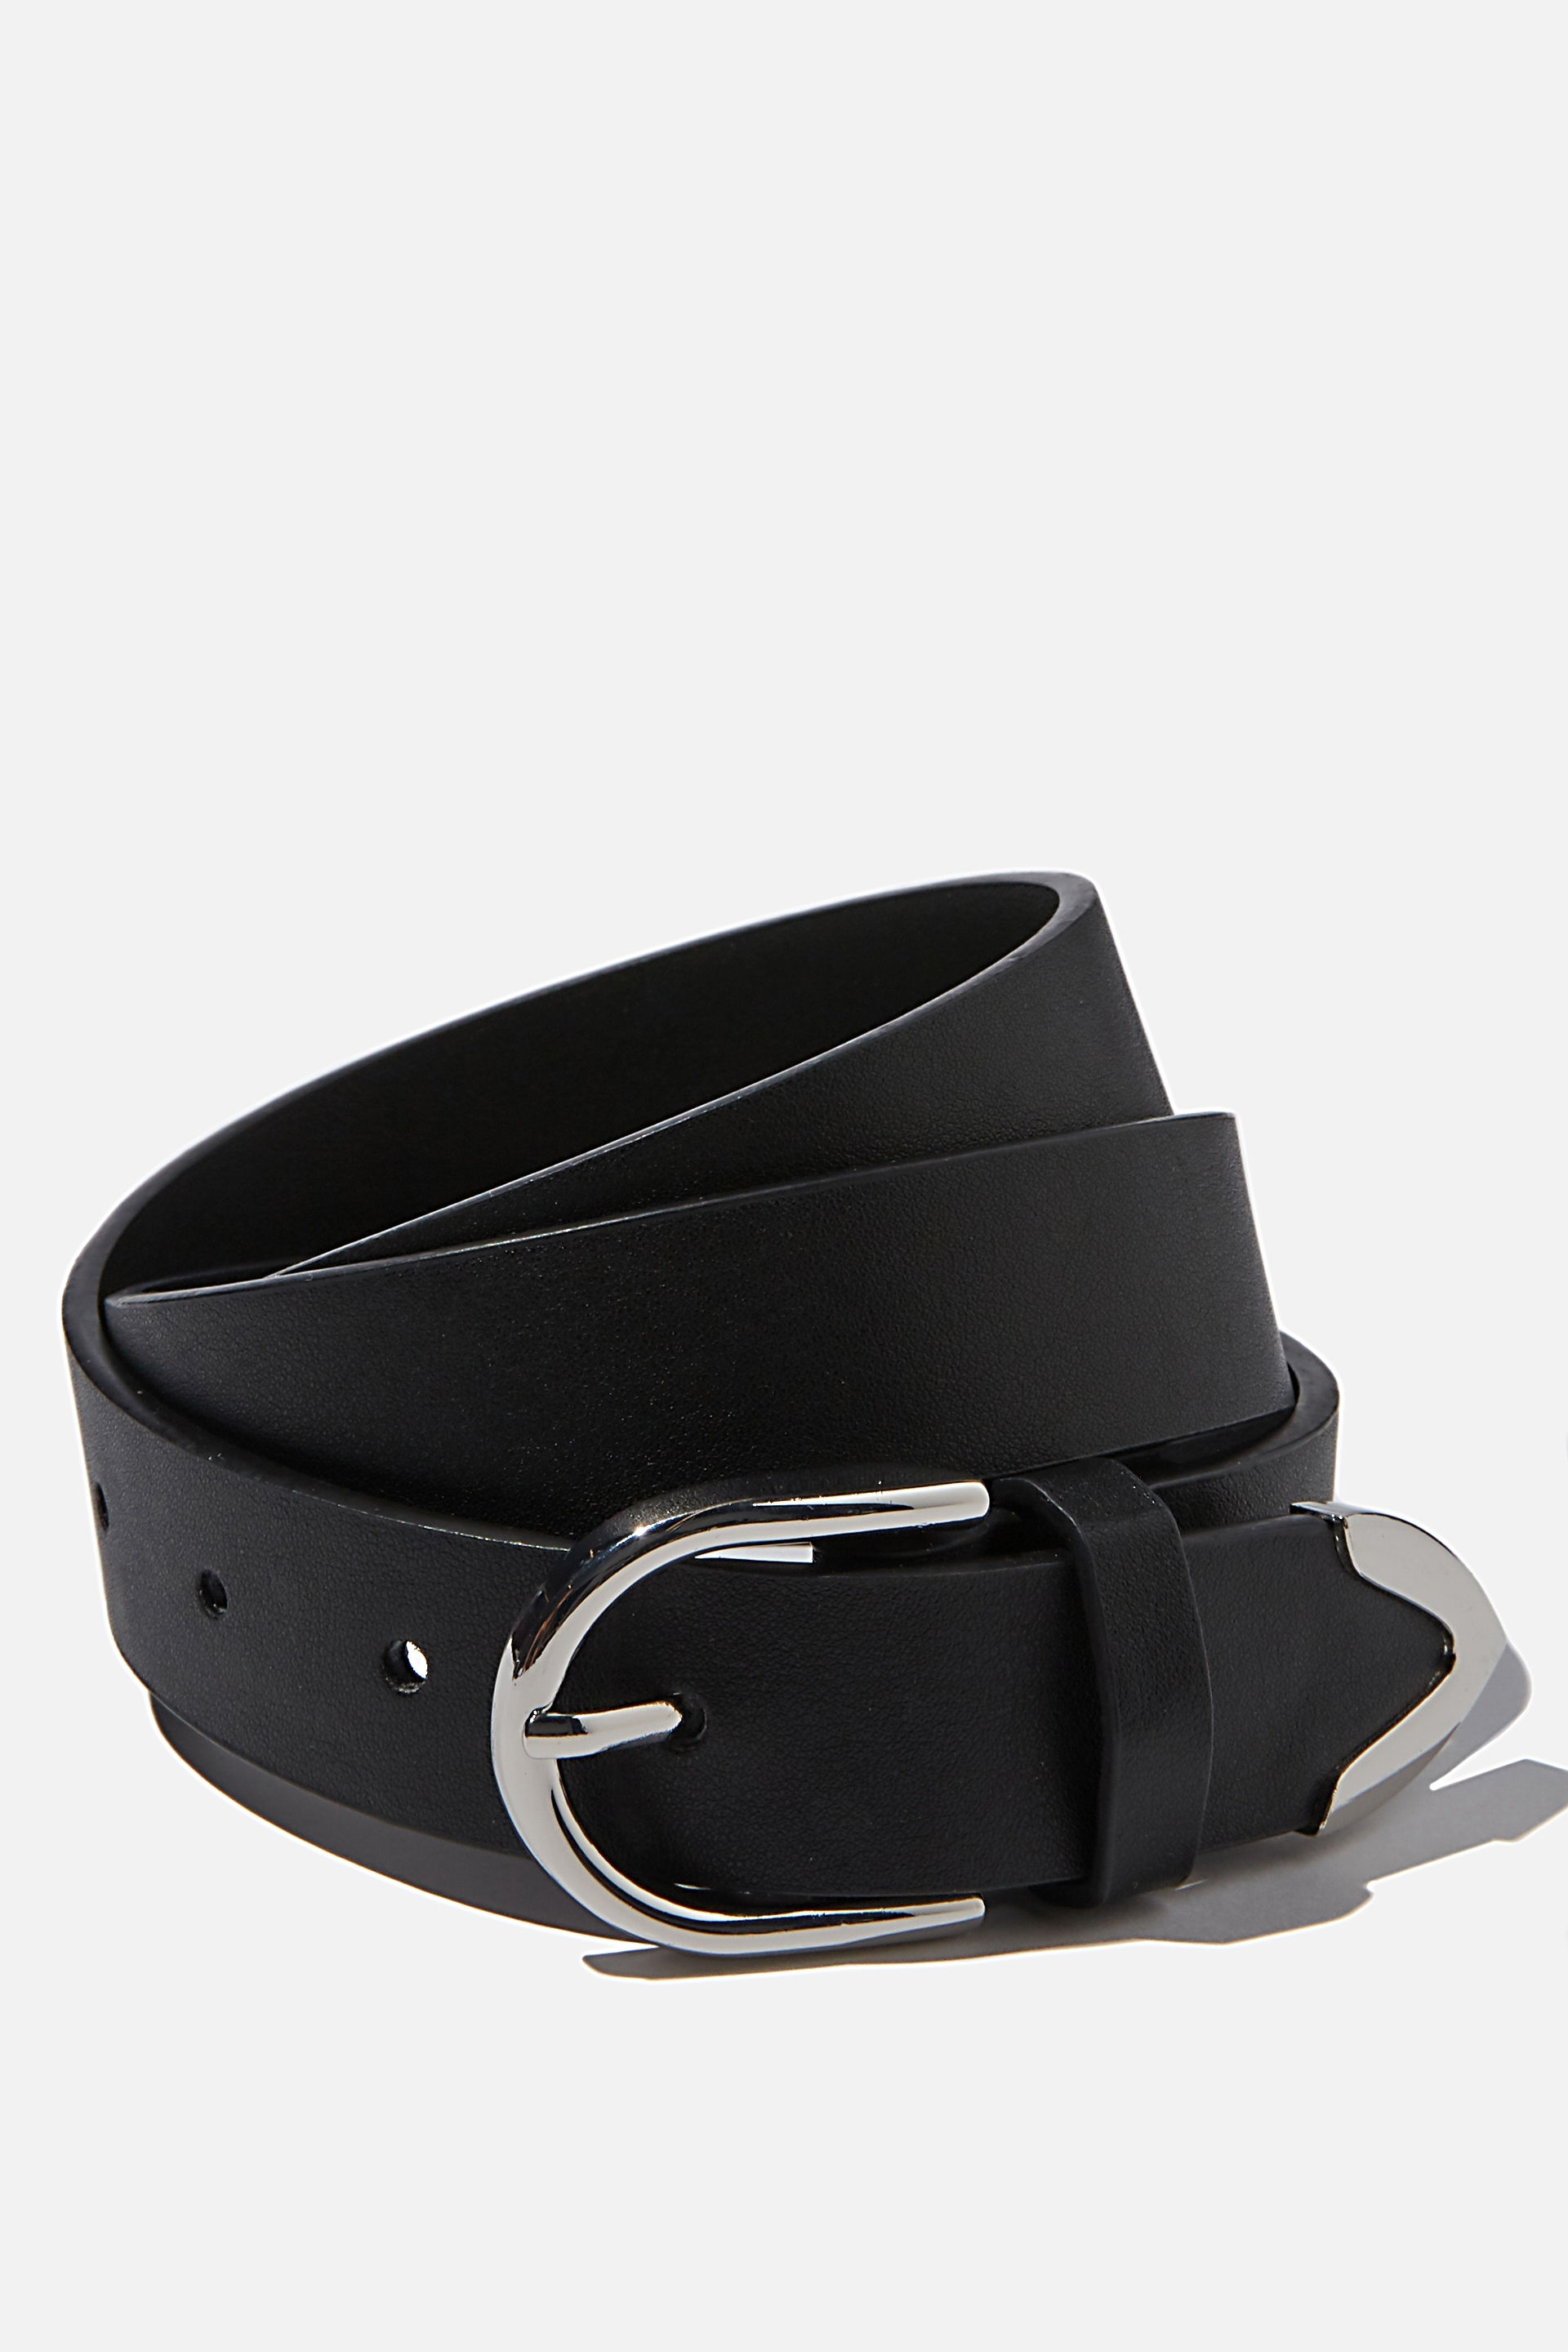 Rubi - To The Point Buckle Belt - Black/ silver